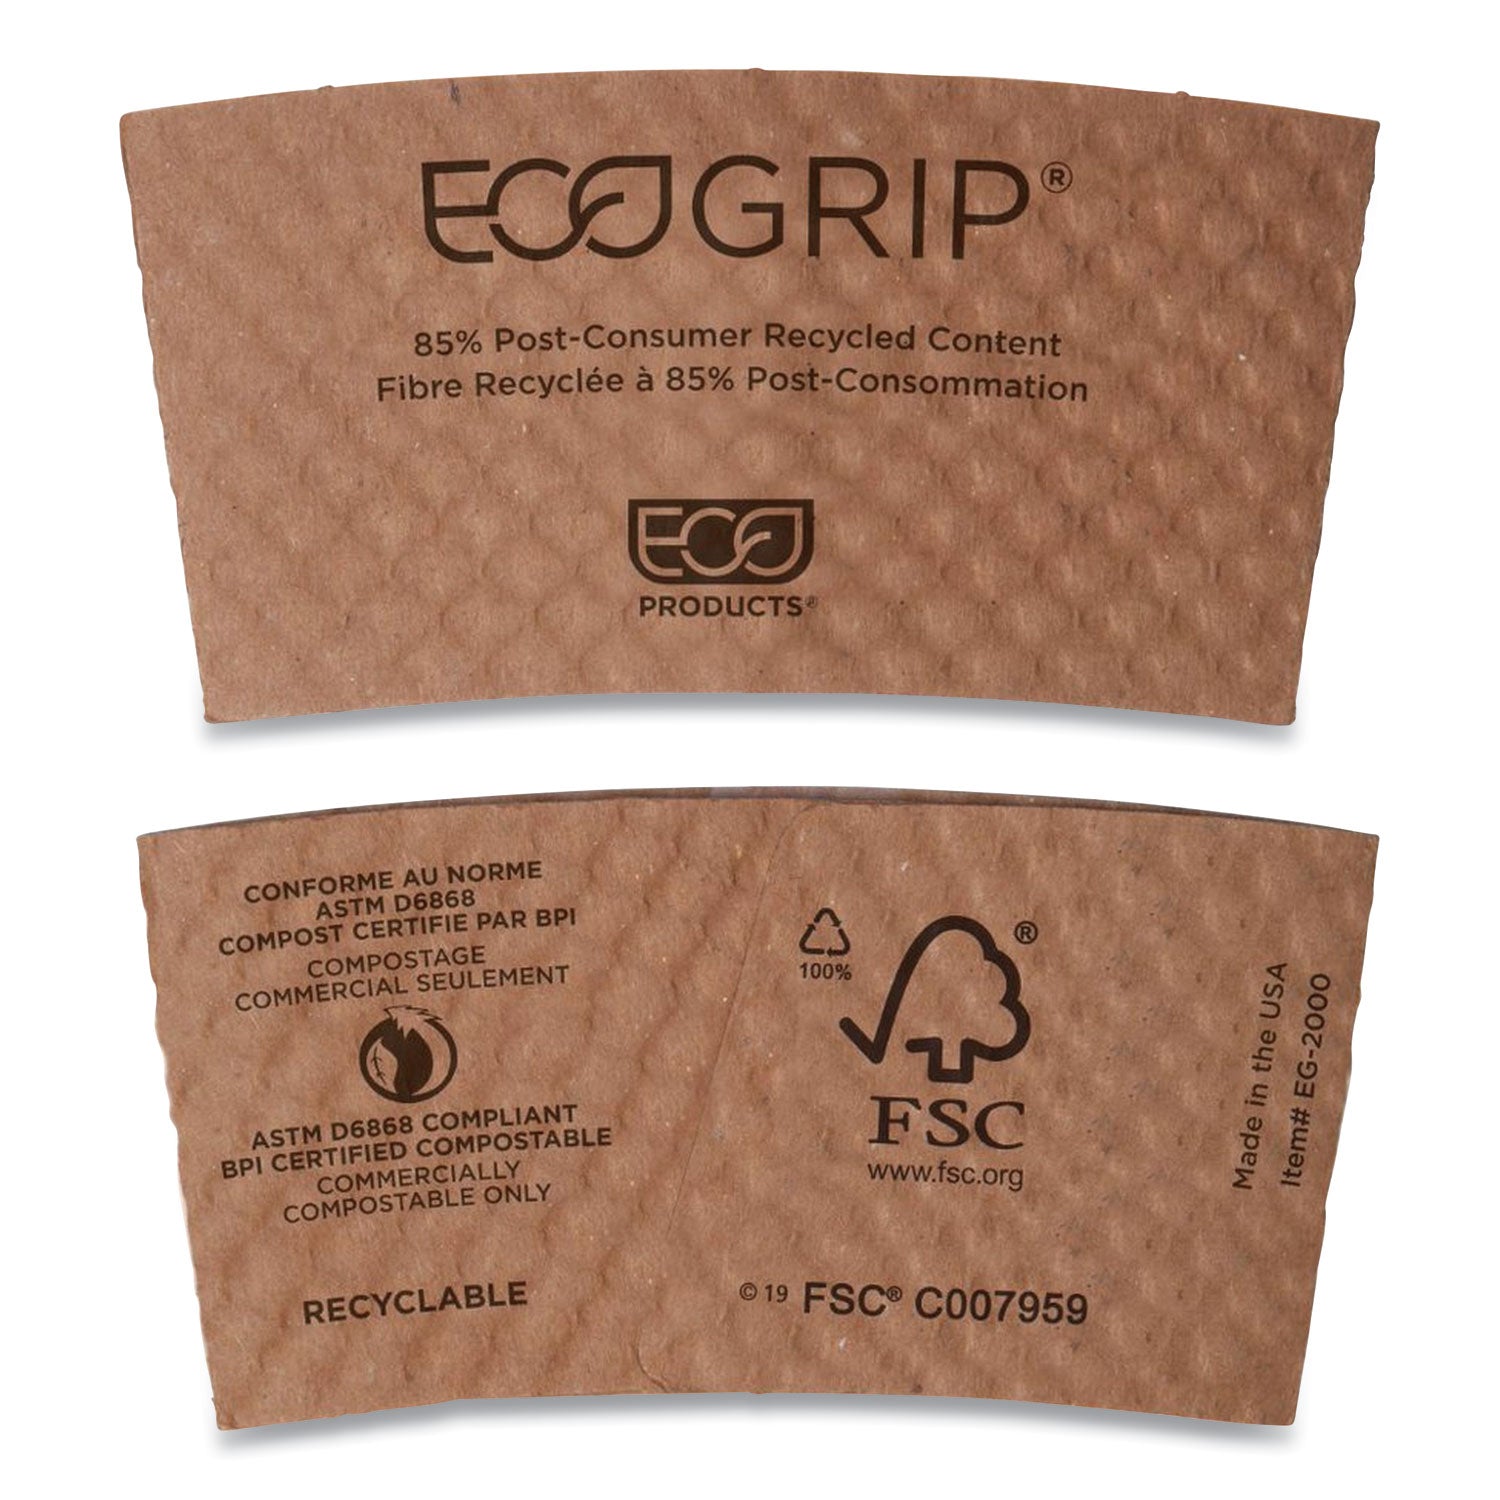 EcoGrip Hot Cup Sleeves - Renewable and Compostable, Fits 12, 16, 20, 24 oz Cups, Kraft, 1,300/Carton - 